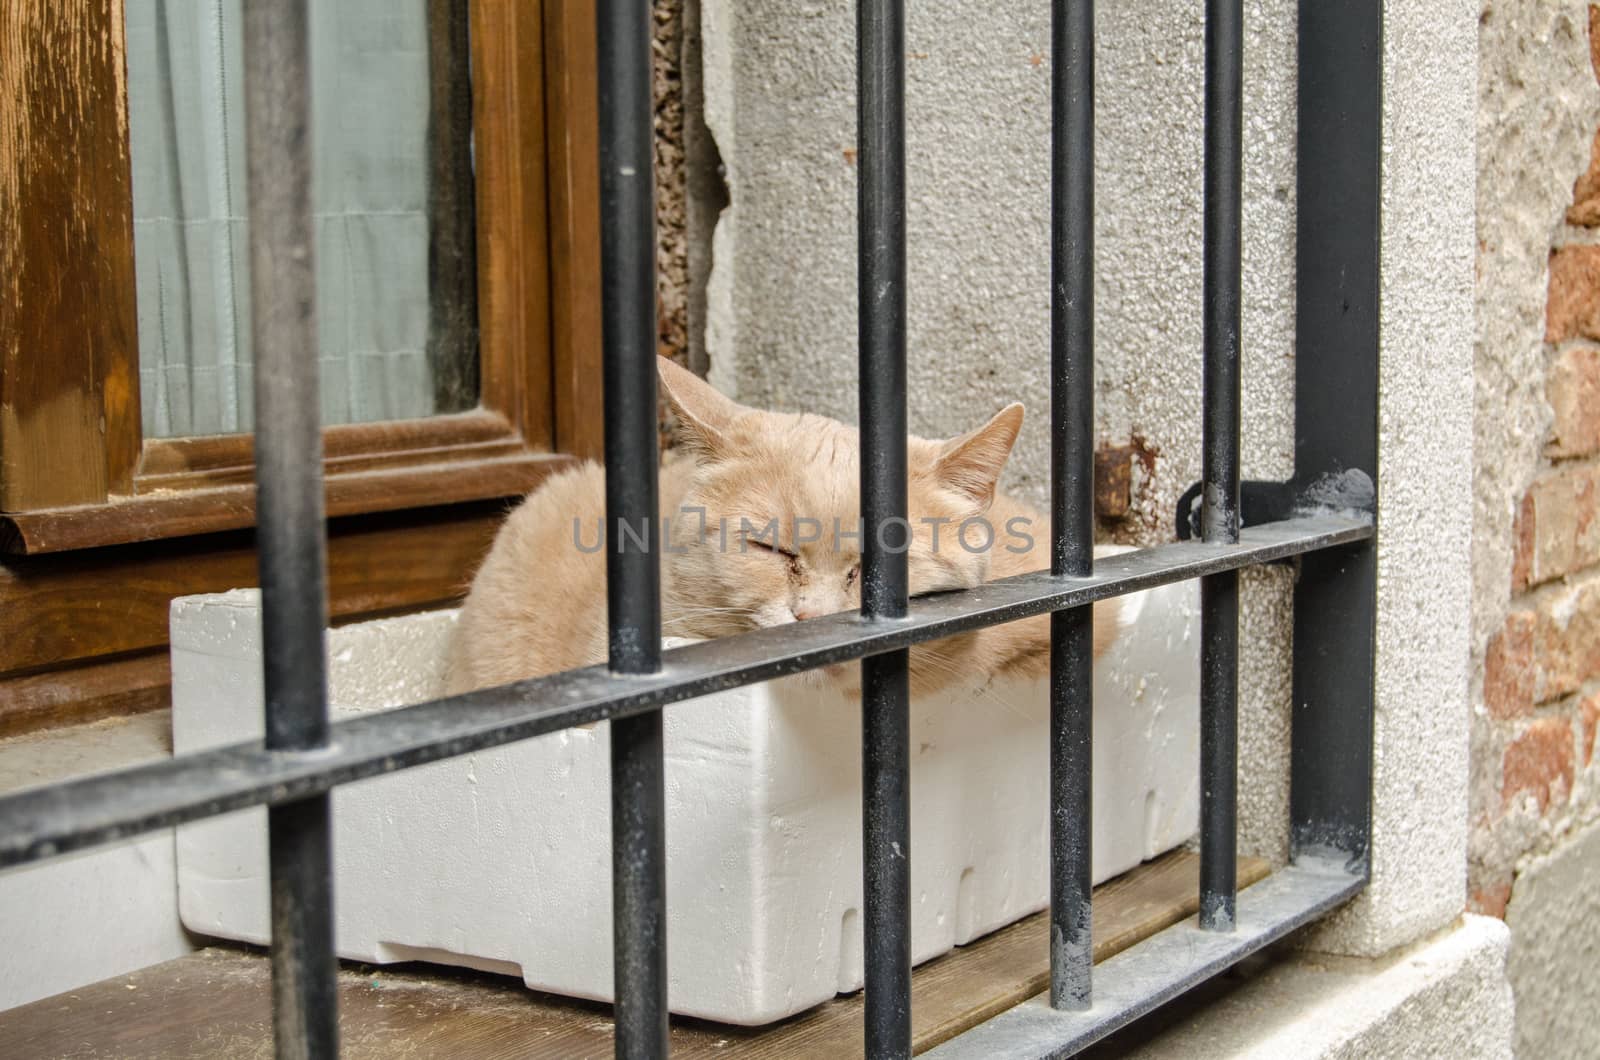 Elderly cat sleeping in a polystyrene box on a windowledge protected by bars on a street in Venice, Italy.